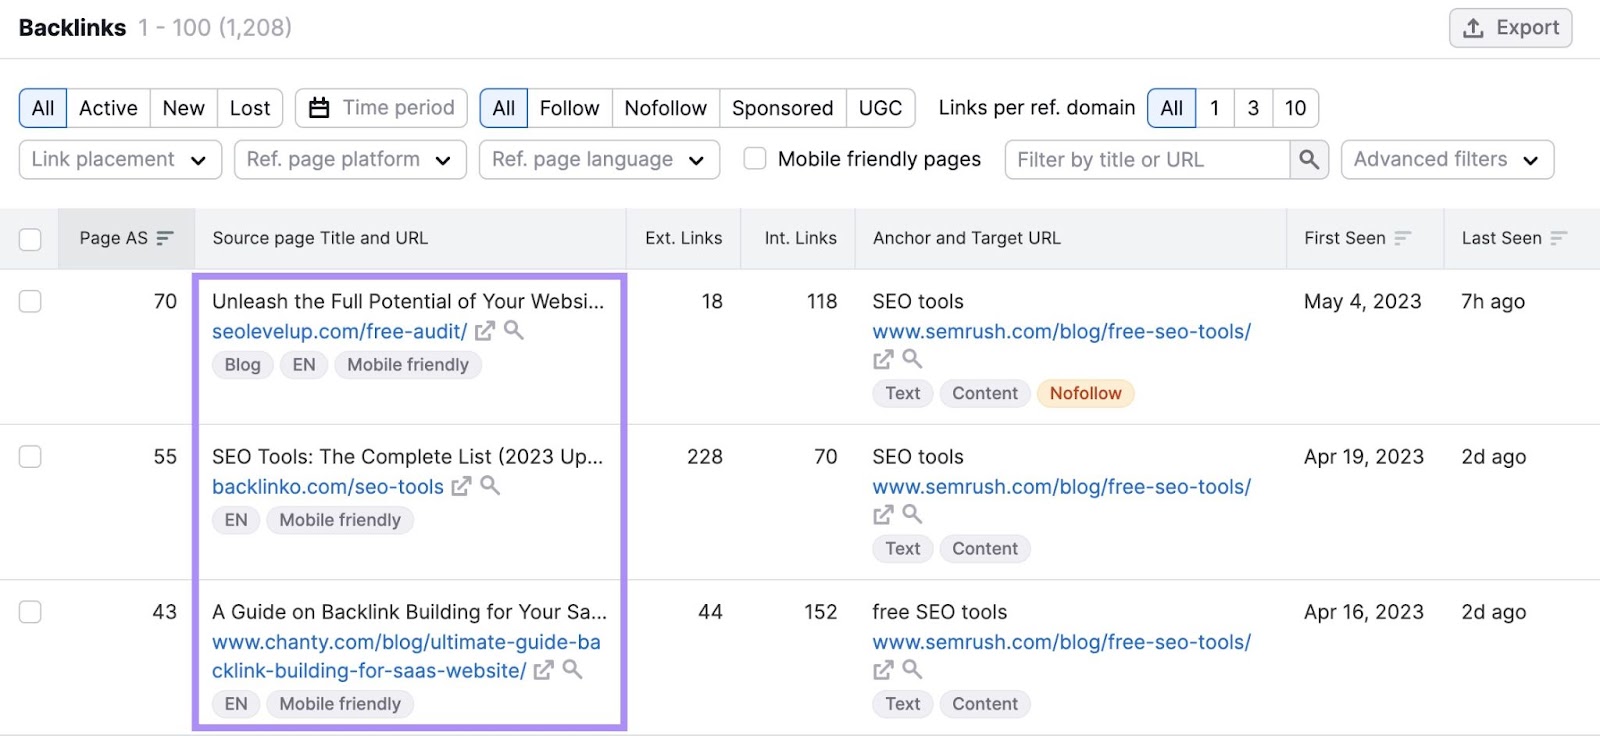 A list of backlinks linking to the Semrush's blog